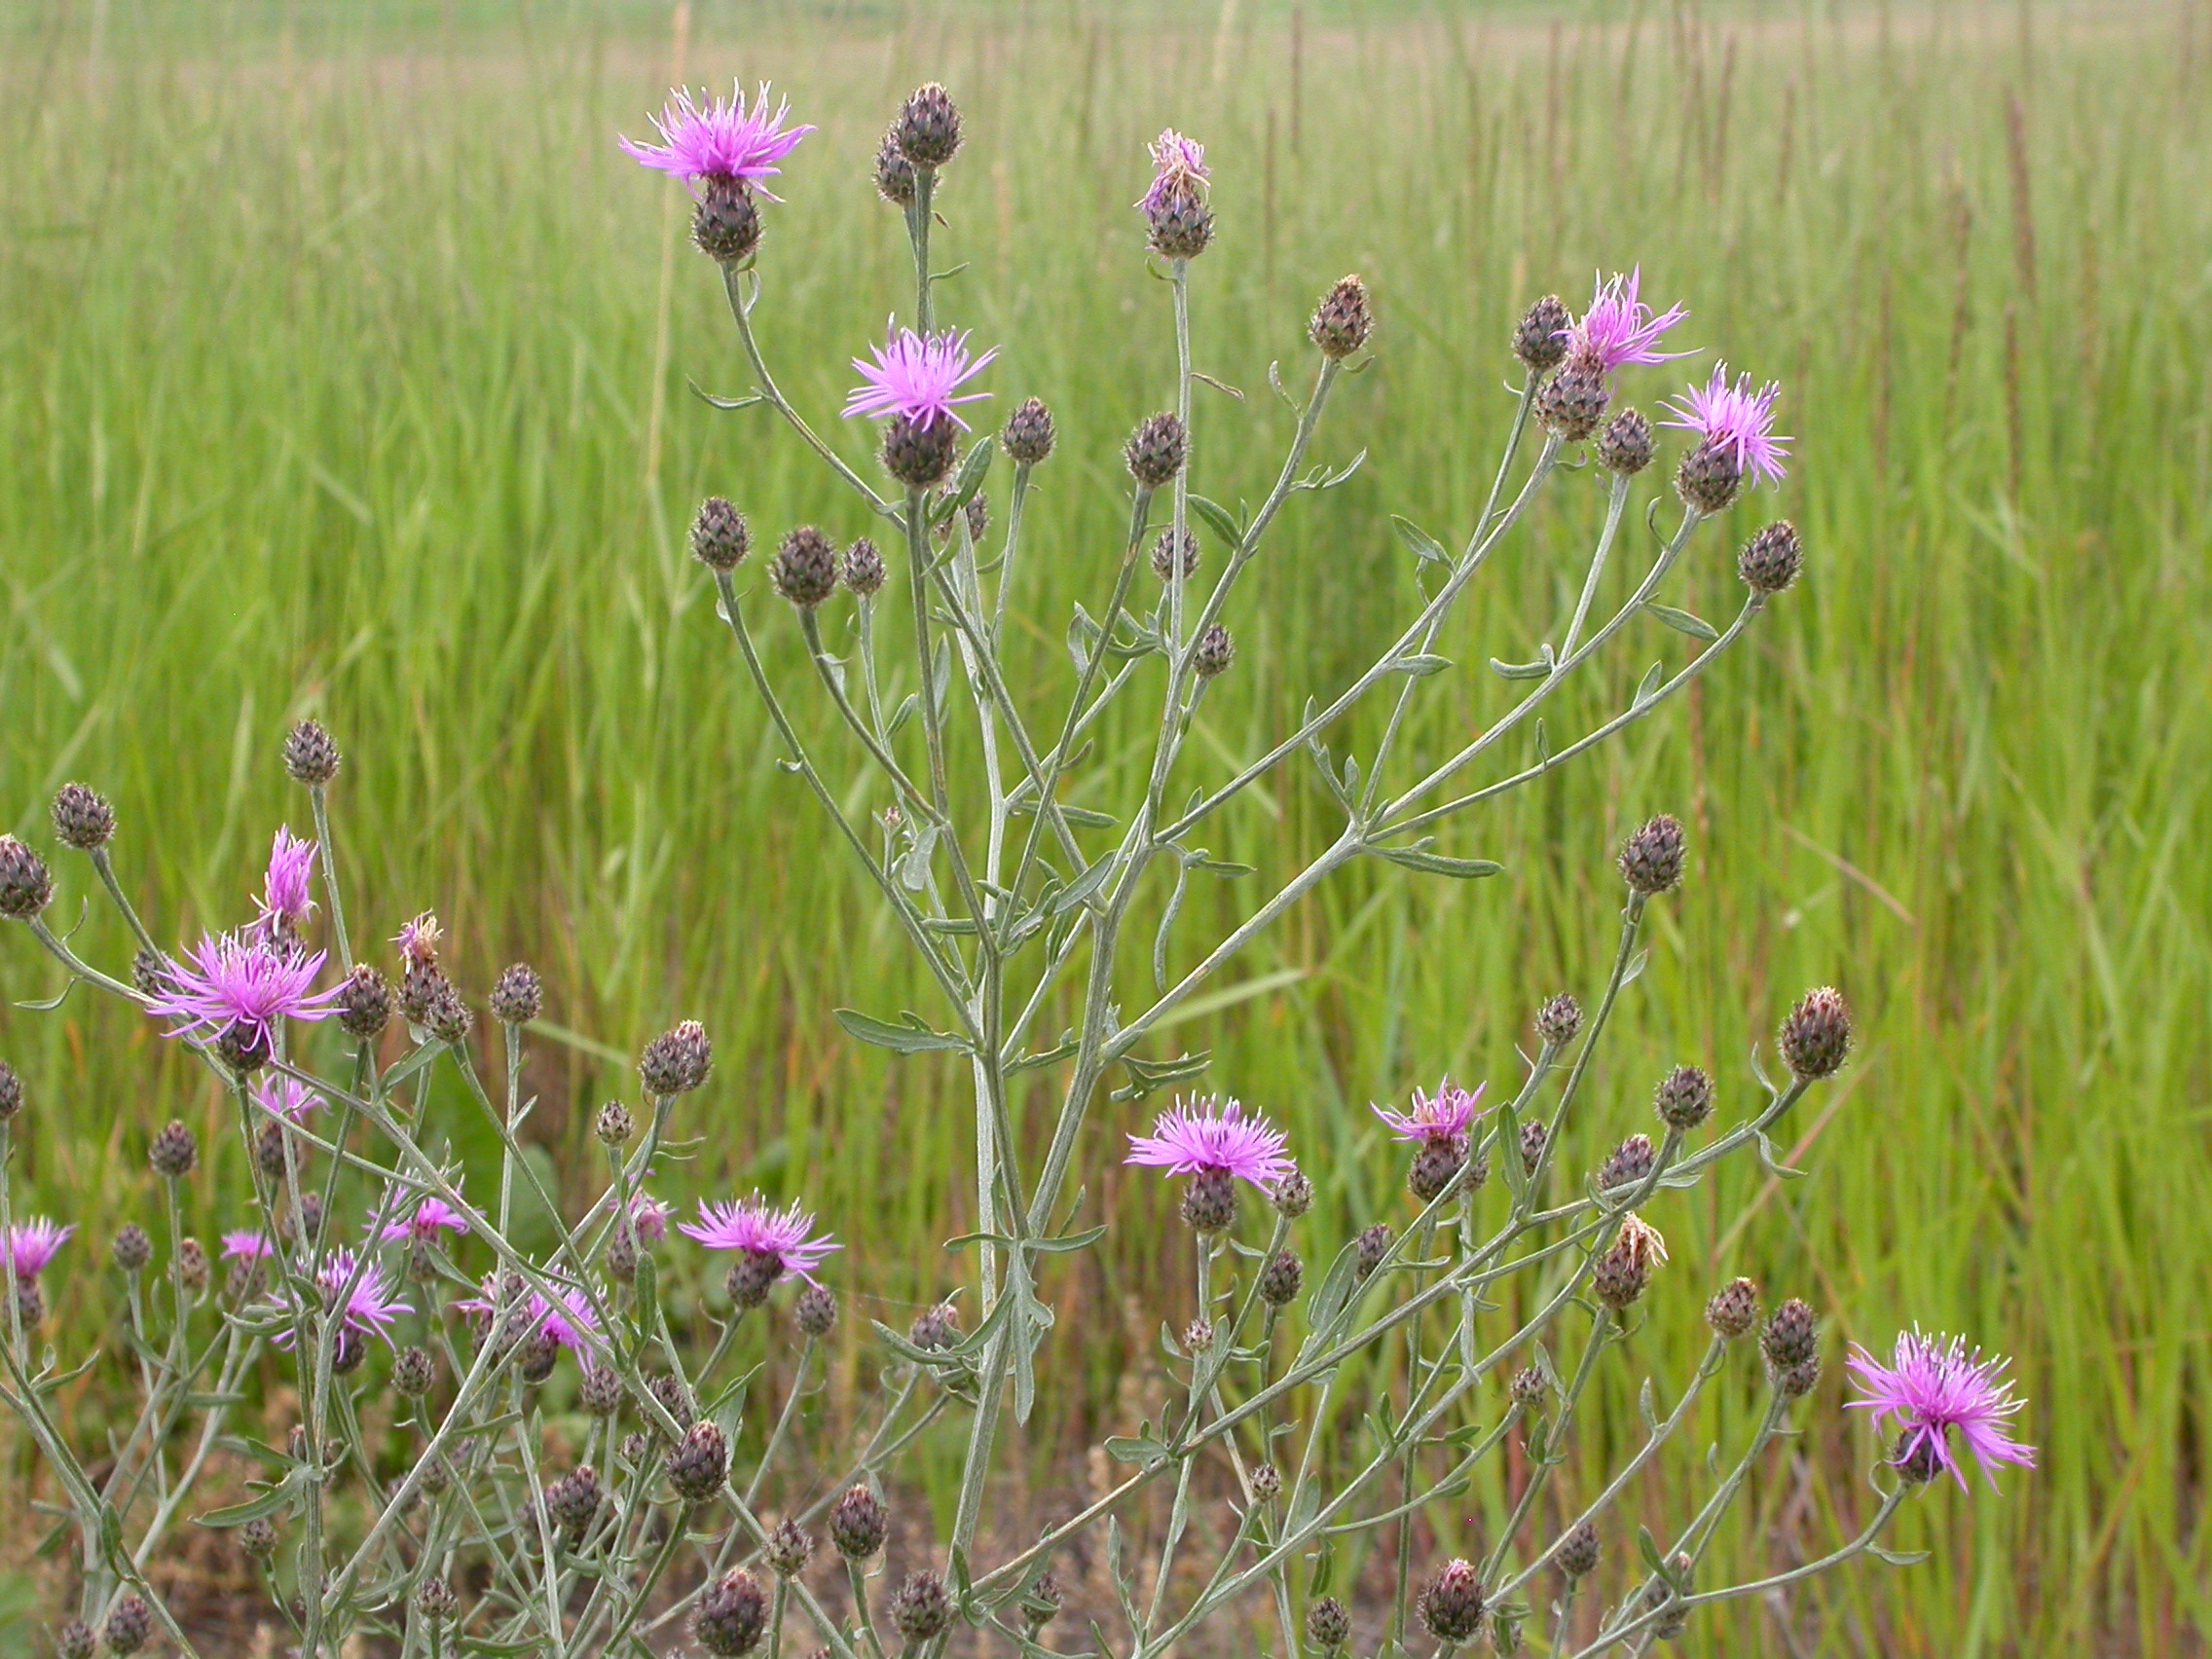 Many-branching non-woody plant with thistle-style flowers on spindly stems with green grass in the background.